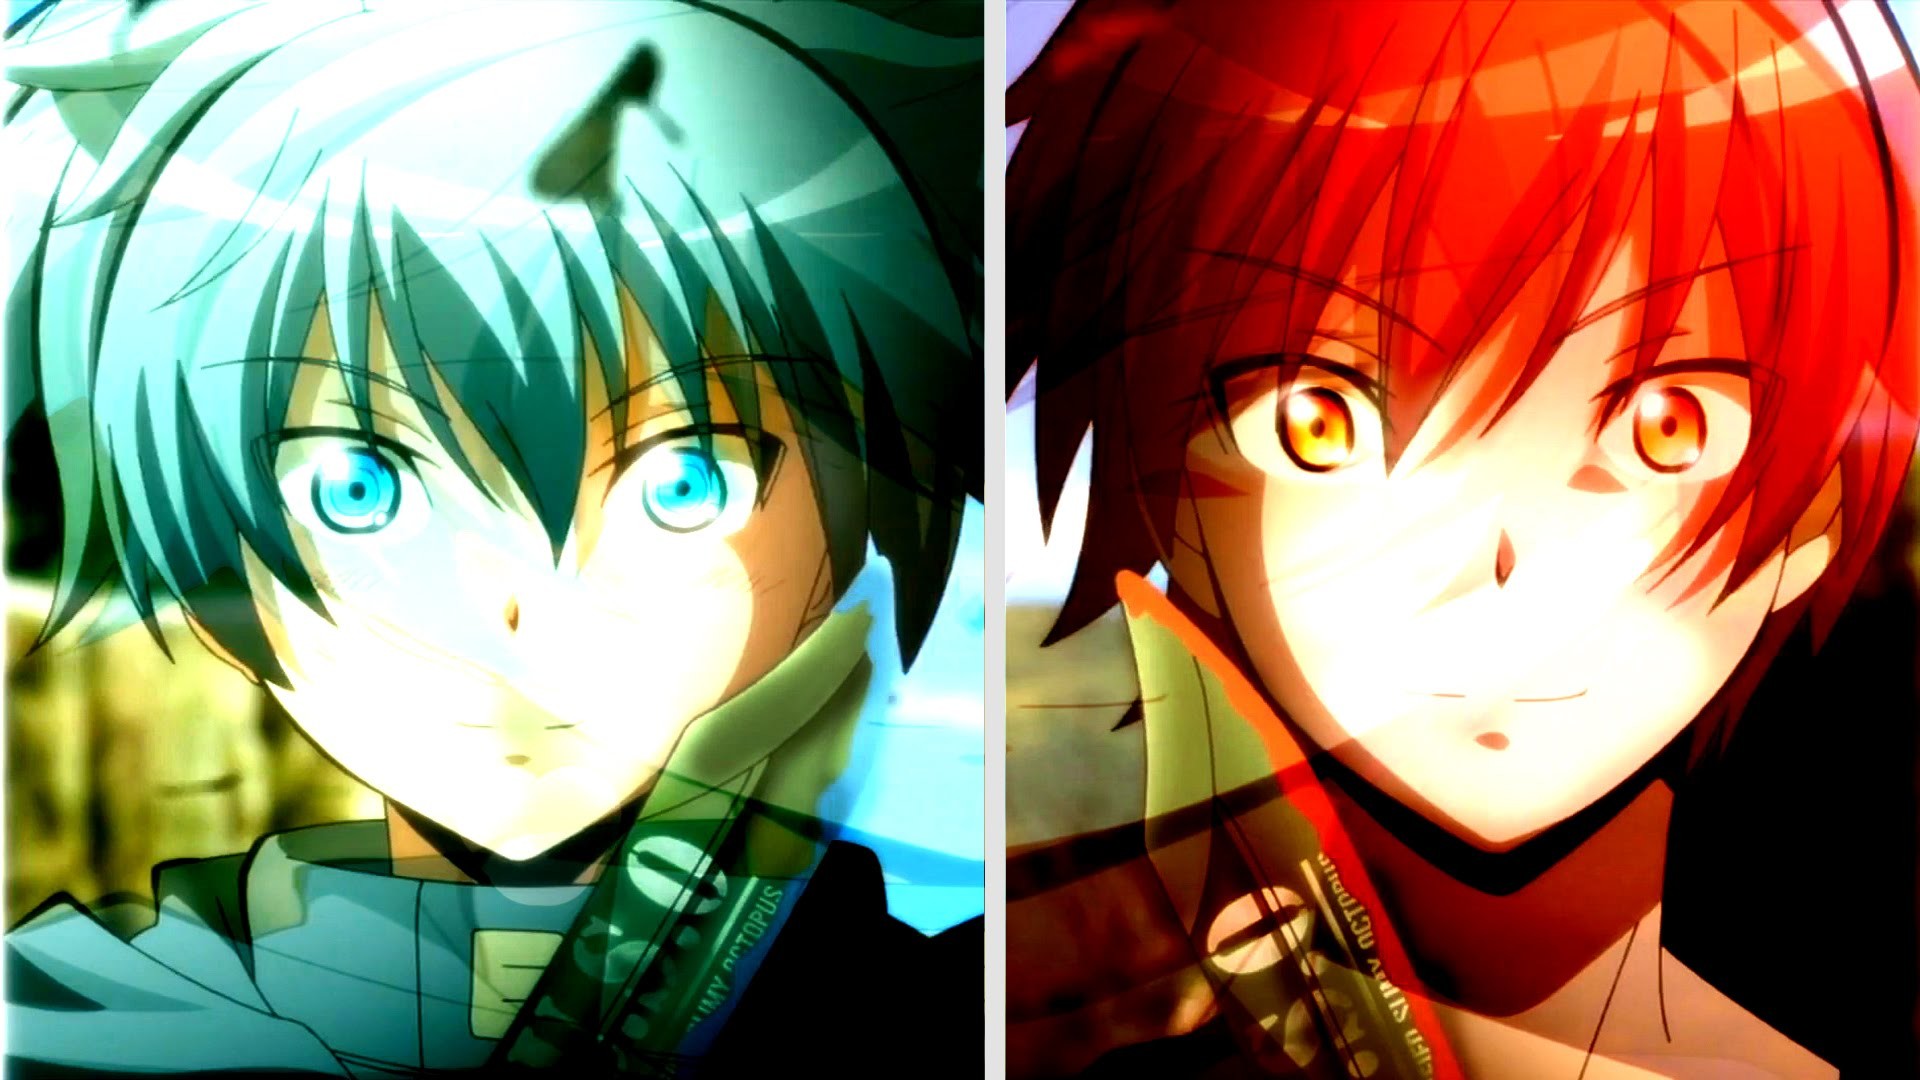 1920x1080 Pin by Stafy on Assassination Classroom | Pinterest 84 Assassination  Classroom HD Wallpapers ...